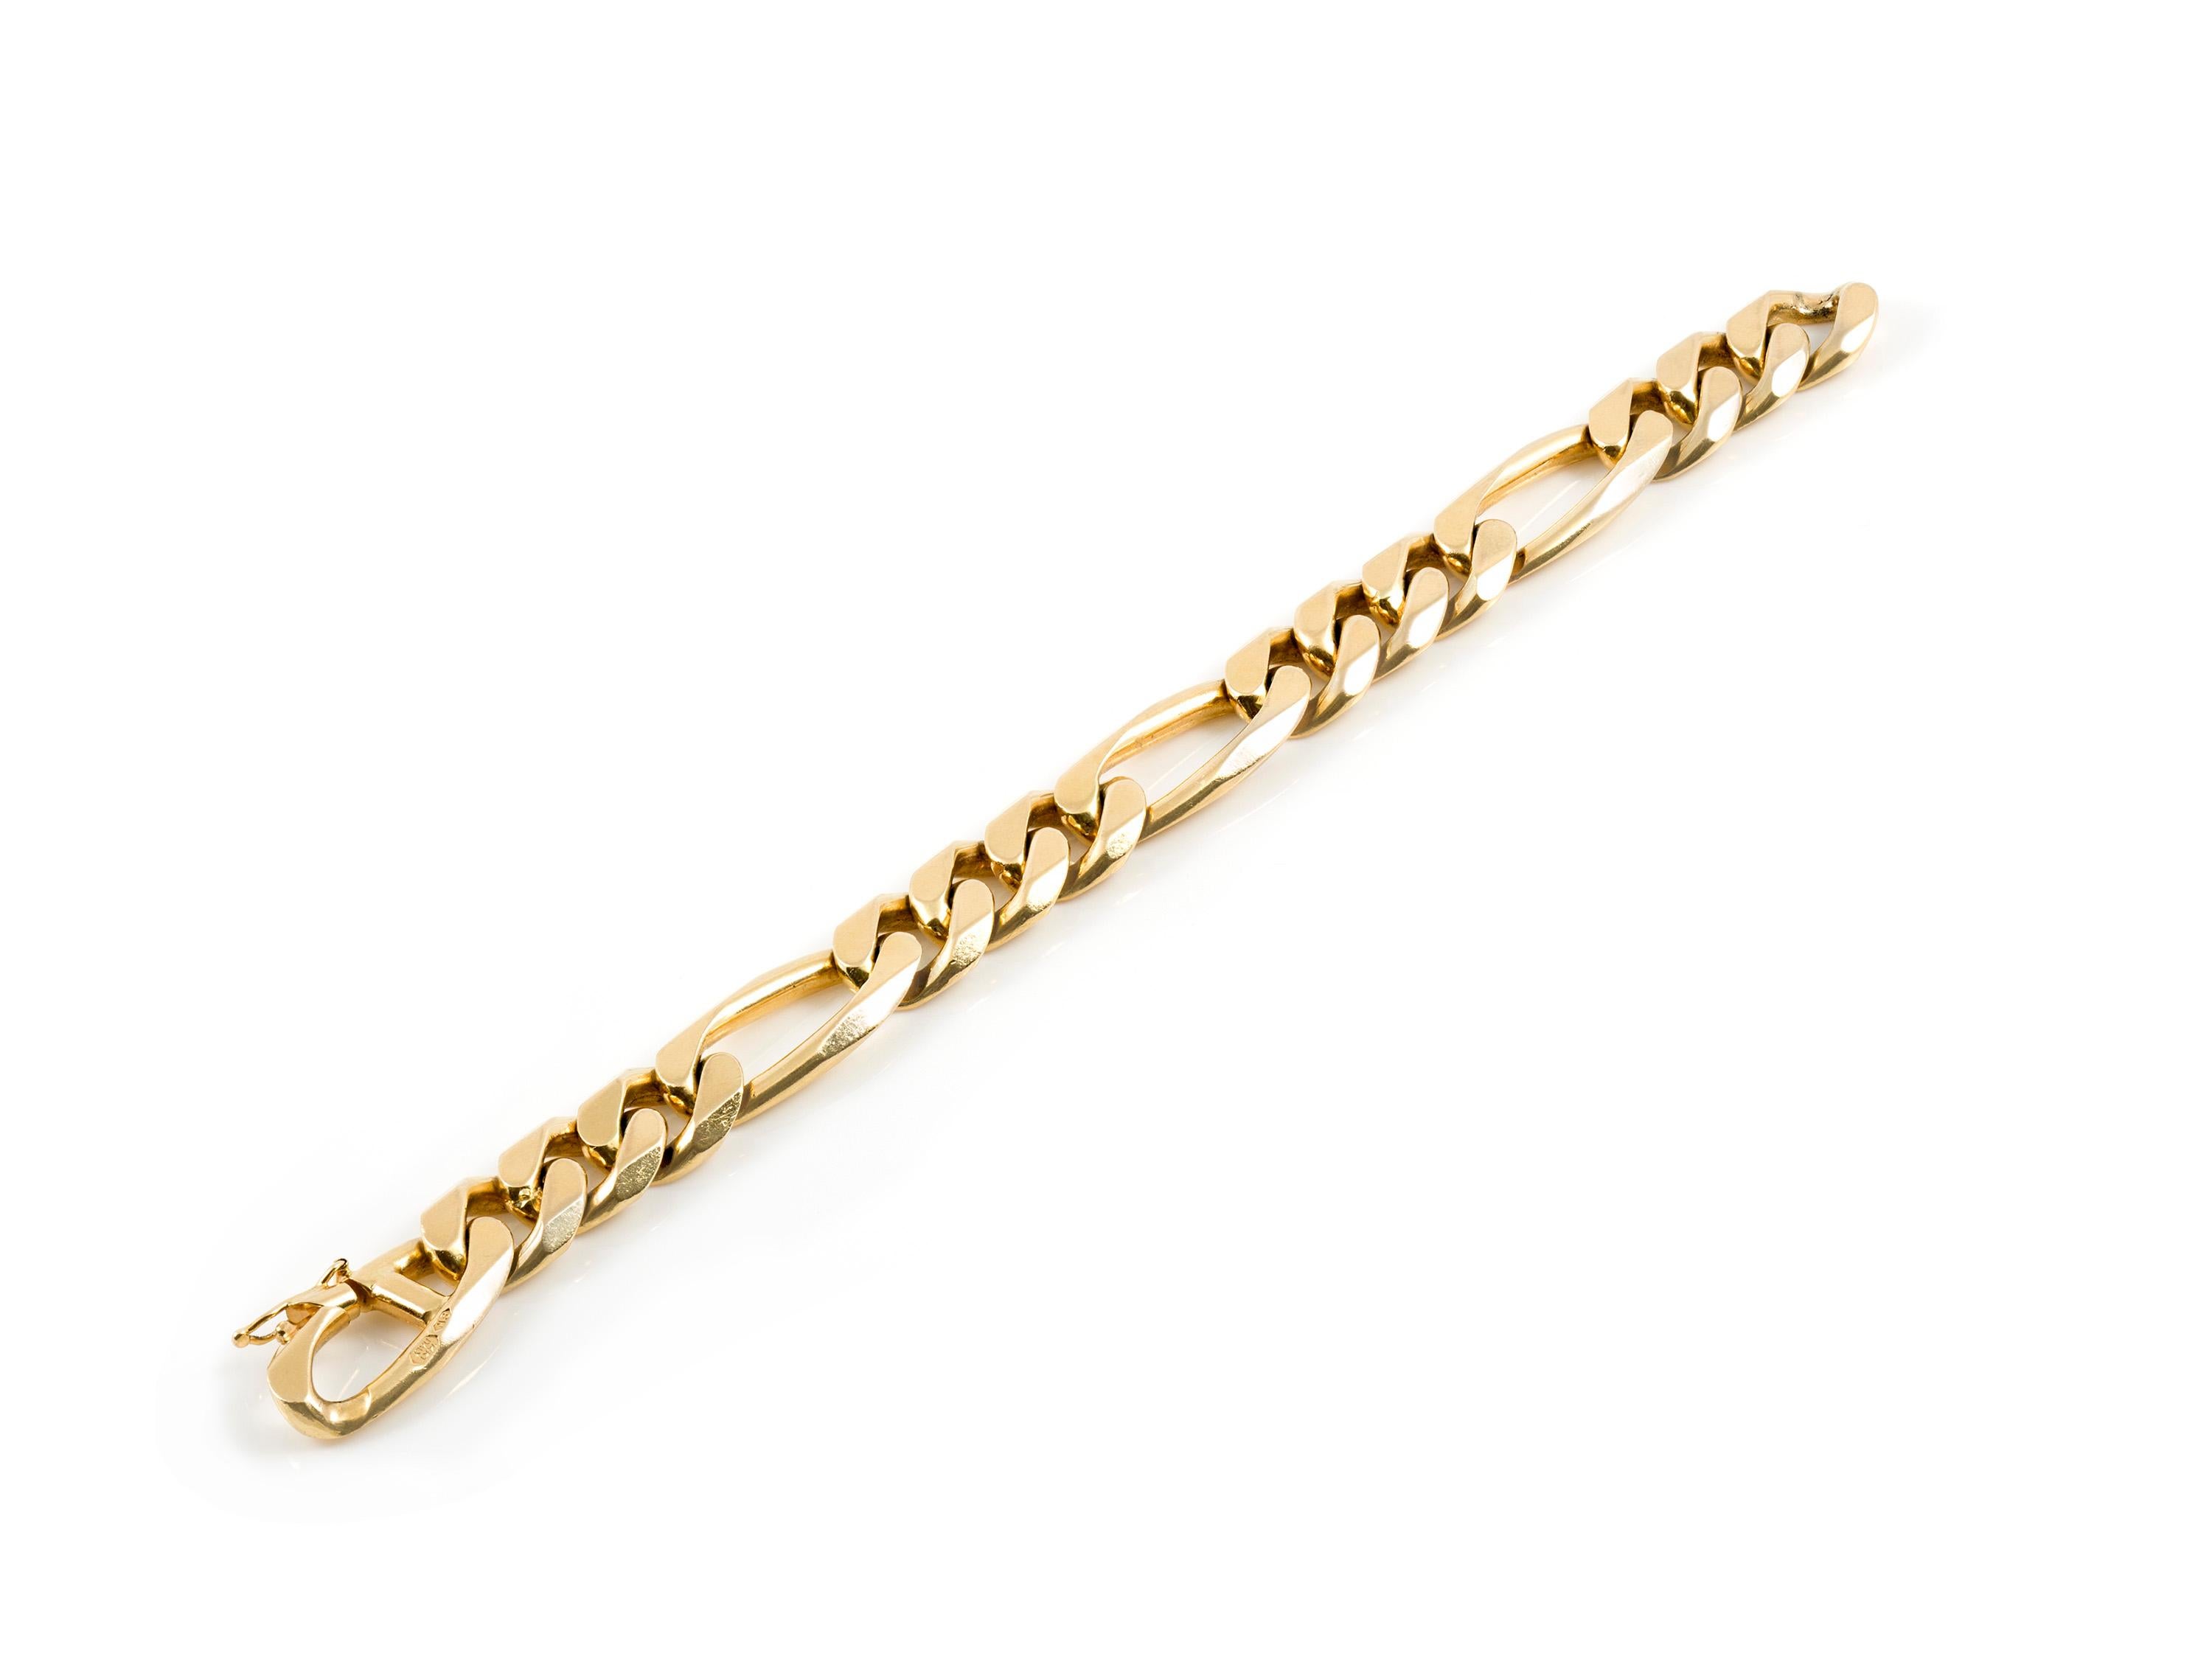 Finely crafted in 14k yellow gold.
Made in Italy
Size 8 1/2